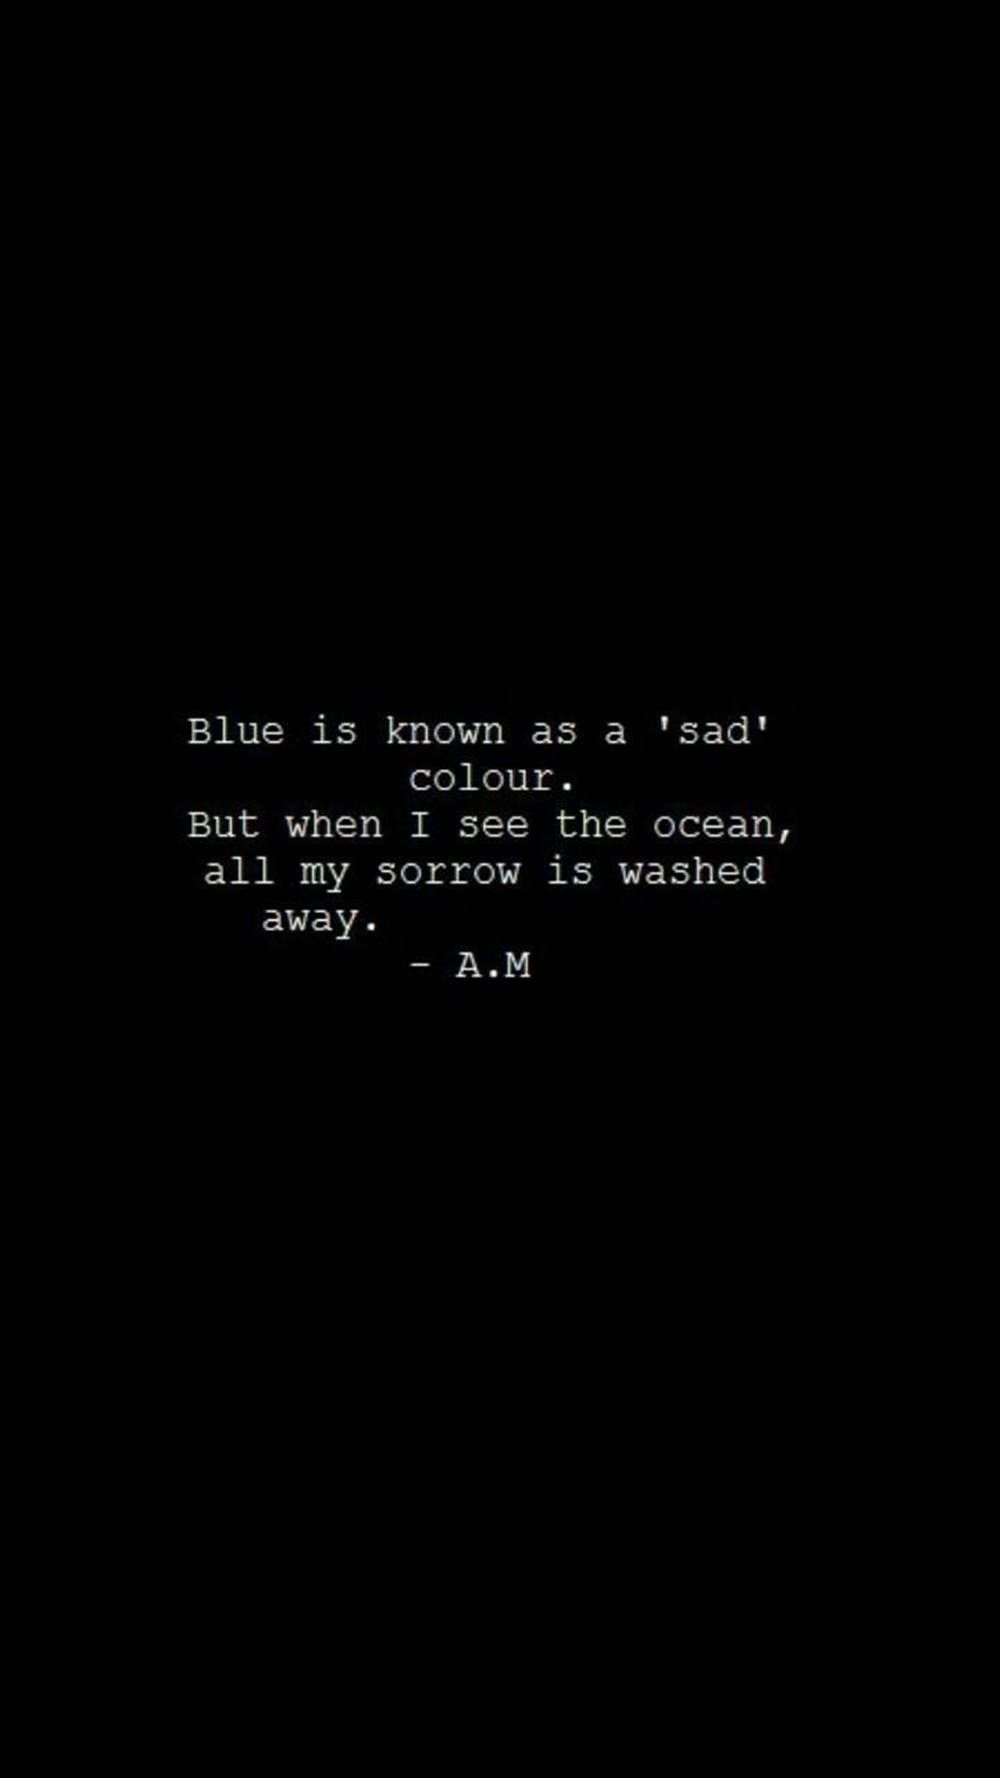 Download Blue Is A Sad Color Aesthetic Black Quotes Wallpaper